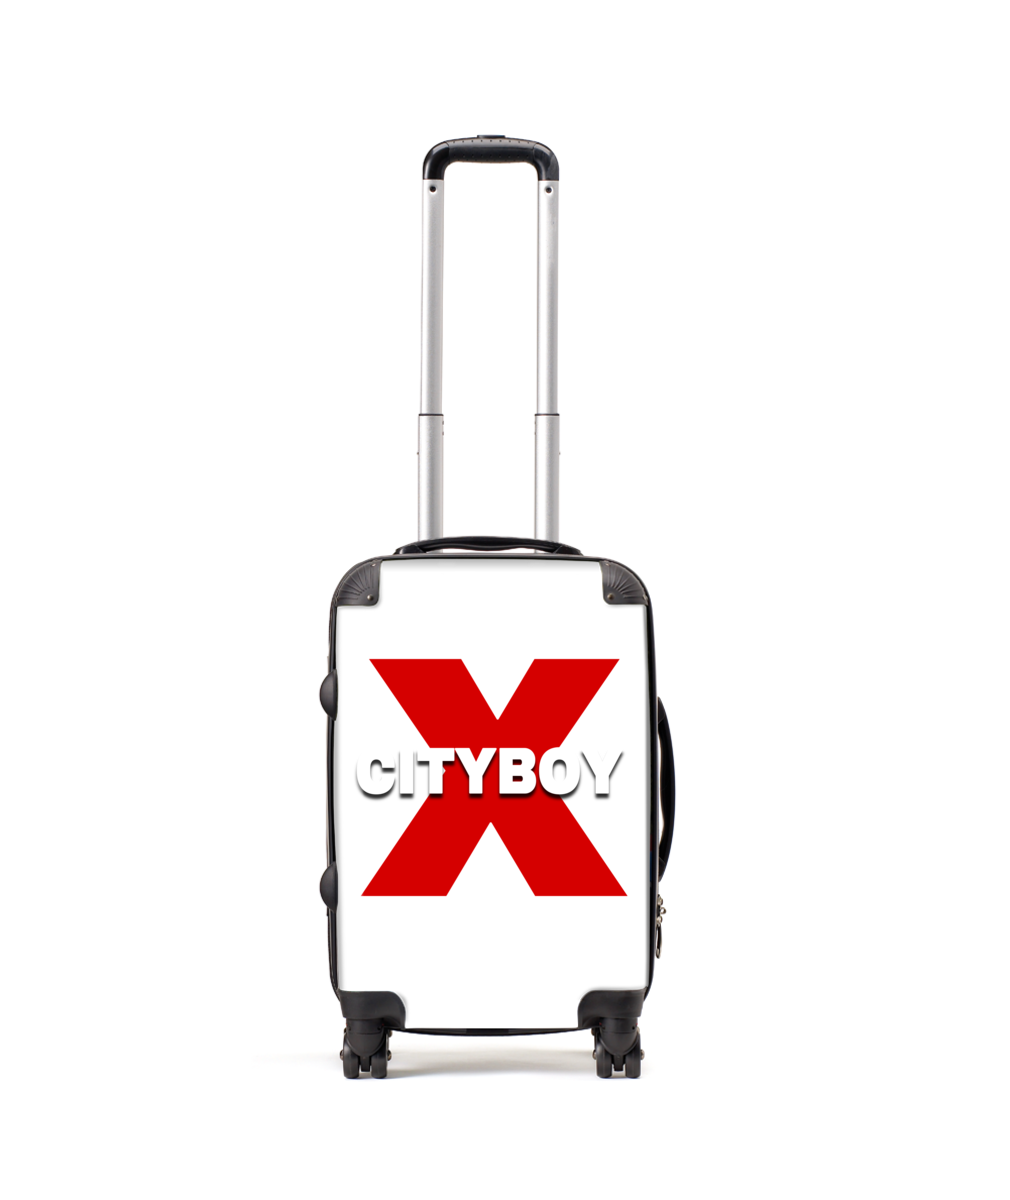 CITYBOY print Cabin Carry-On Suitcase 19